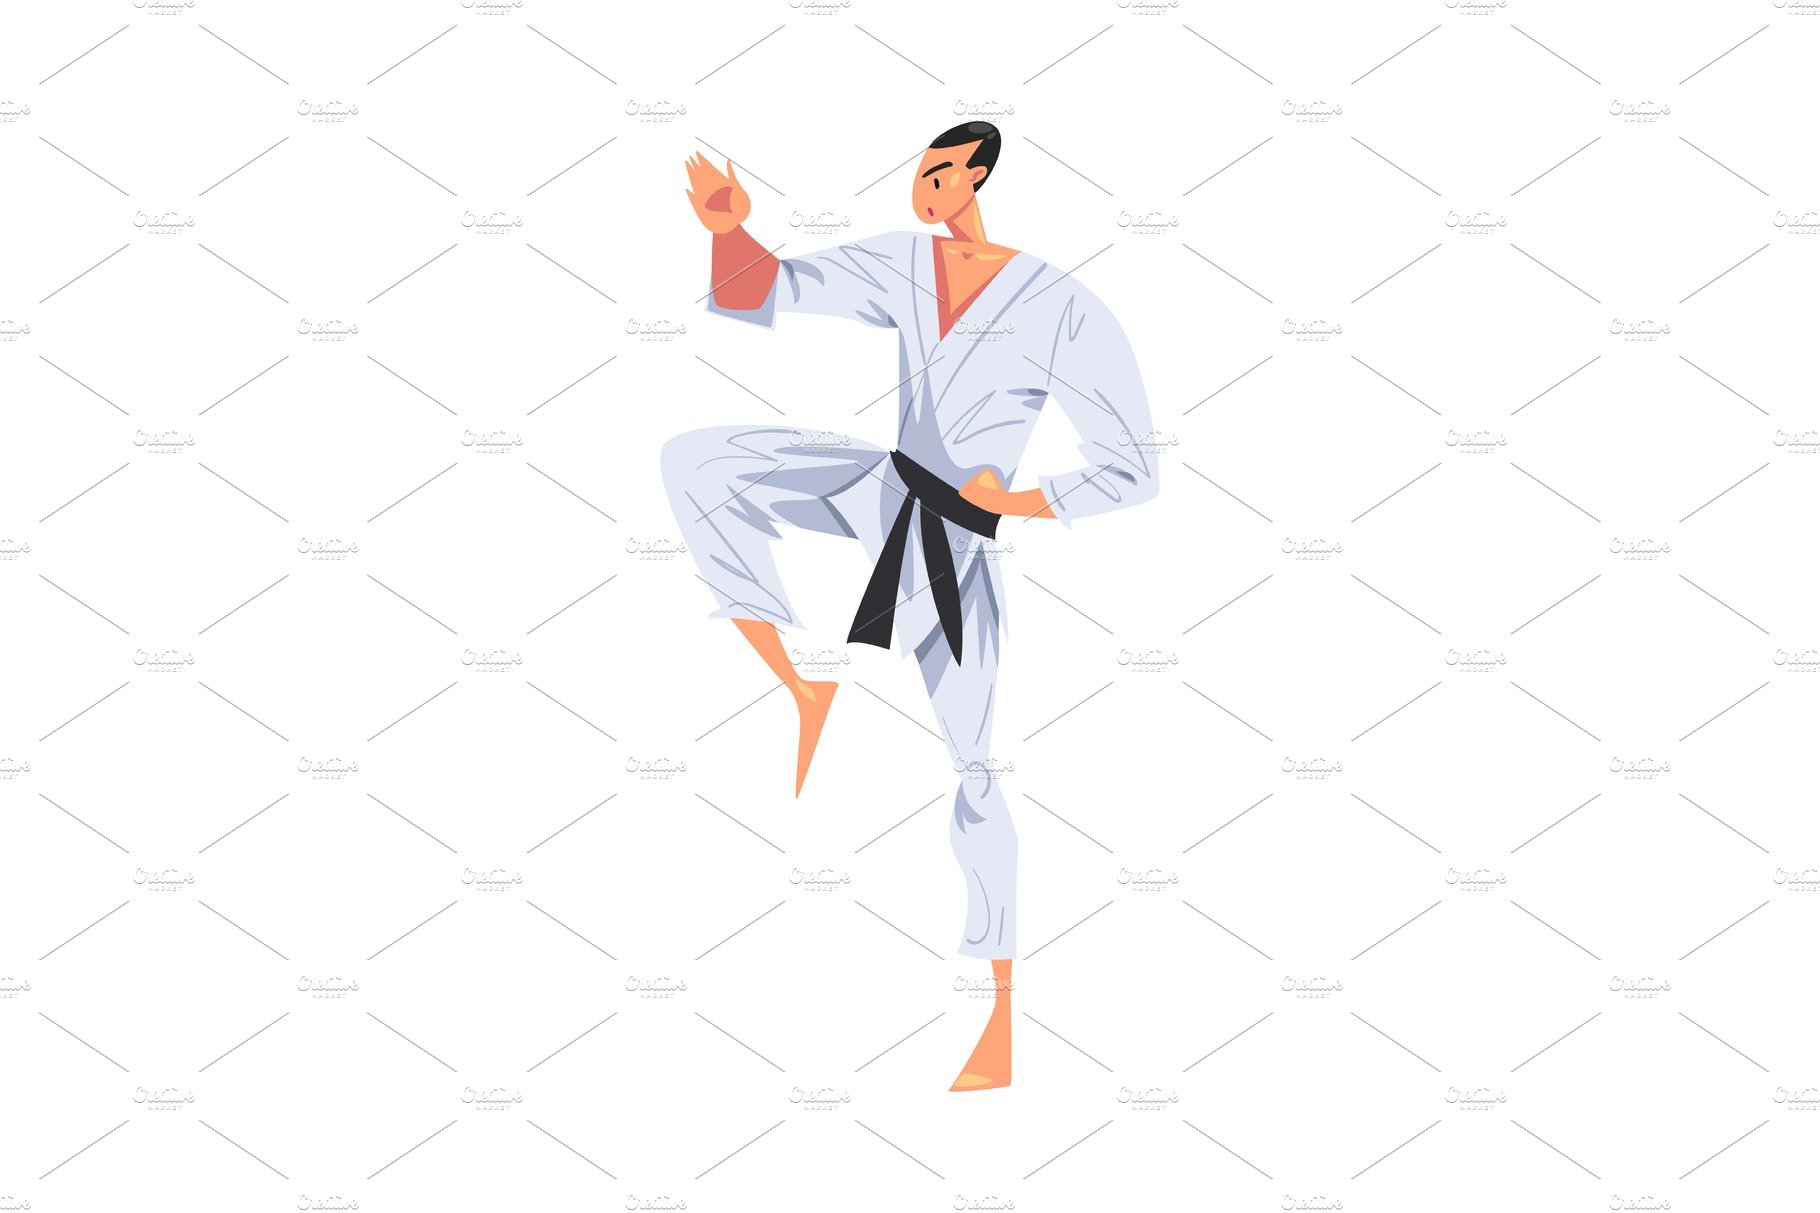 Male Karate Fighter Character cover image.